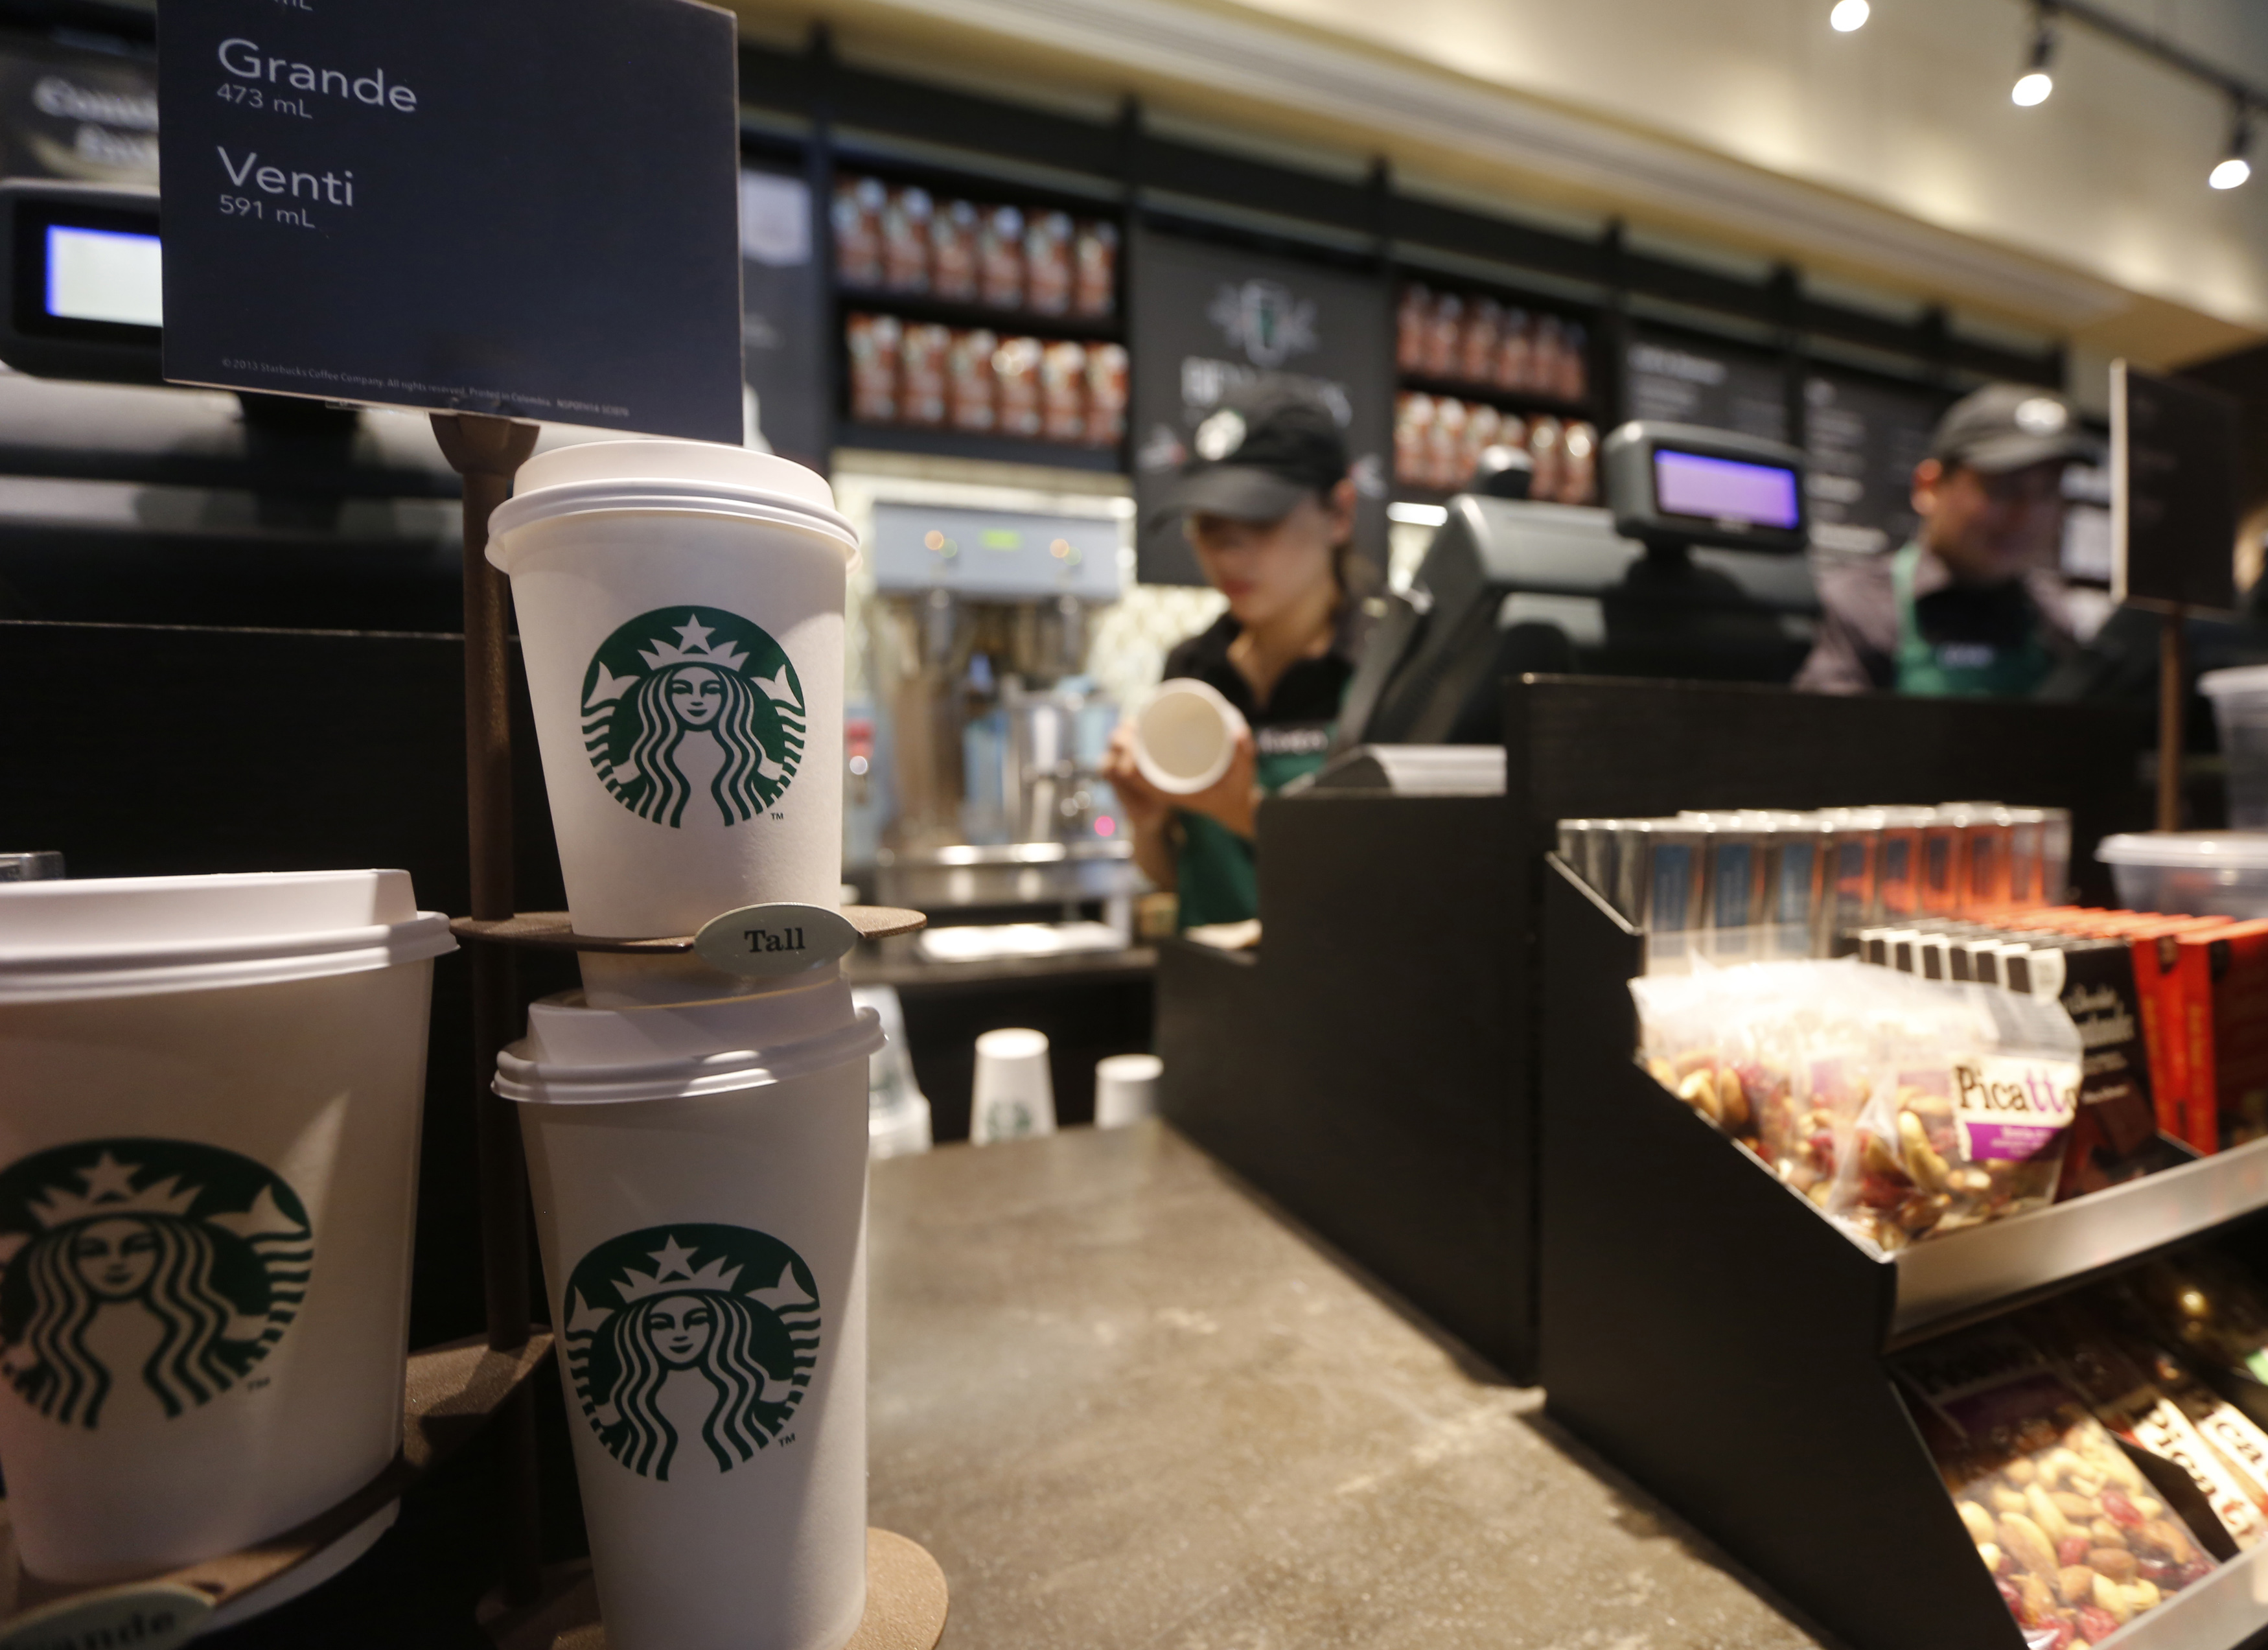 Paper cups of different sizes are seen on display at Starbuck's first Colombian store at 93 park in Bogota